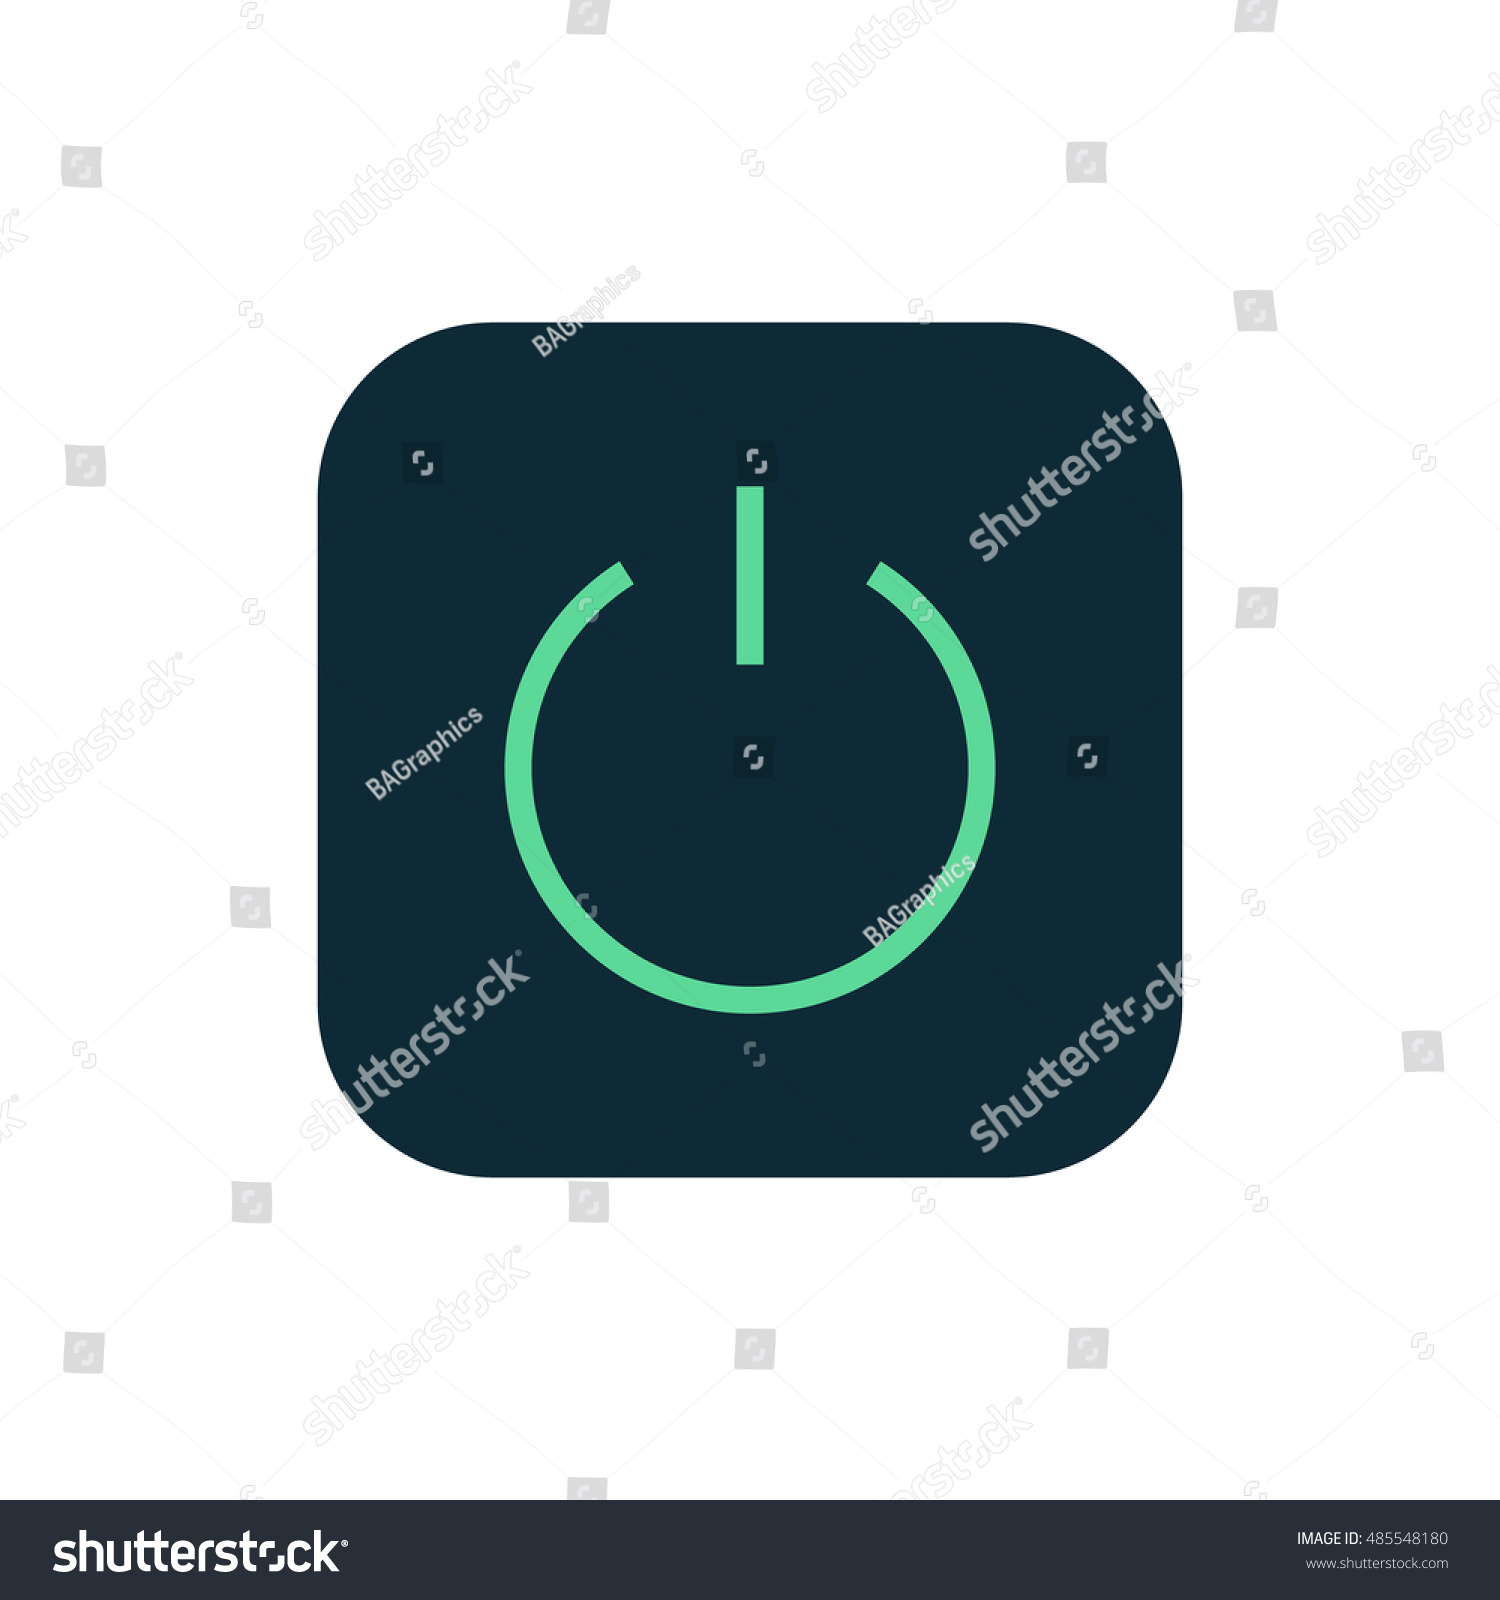 SVG of Power icon vector, clip art. Also useful as logo, square app icon, web UI element, symbol, graphic image, silhouette and illustration. Compatible with ai, cdr, jpg, png, pdf, svg and eps formats. svg